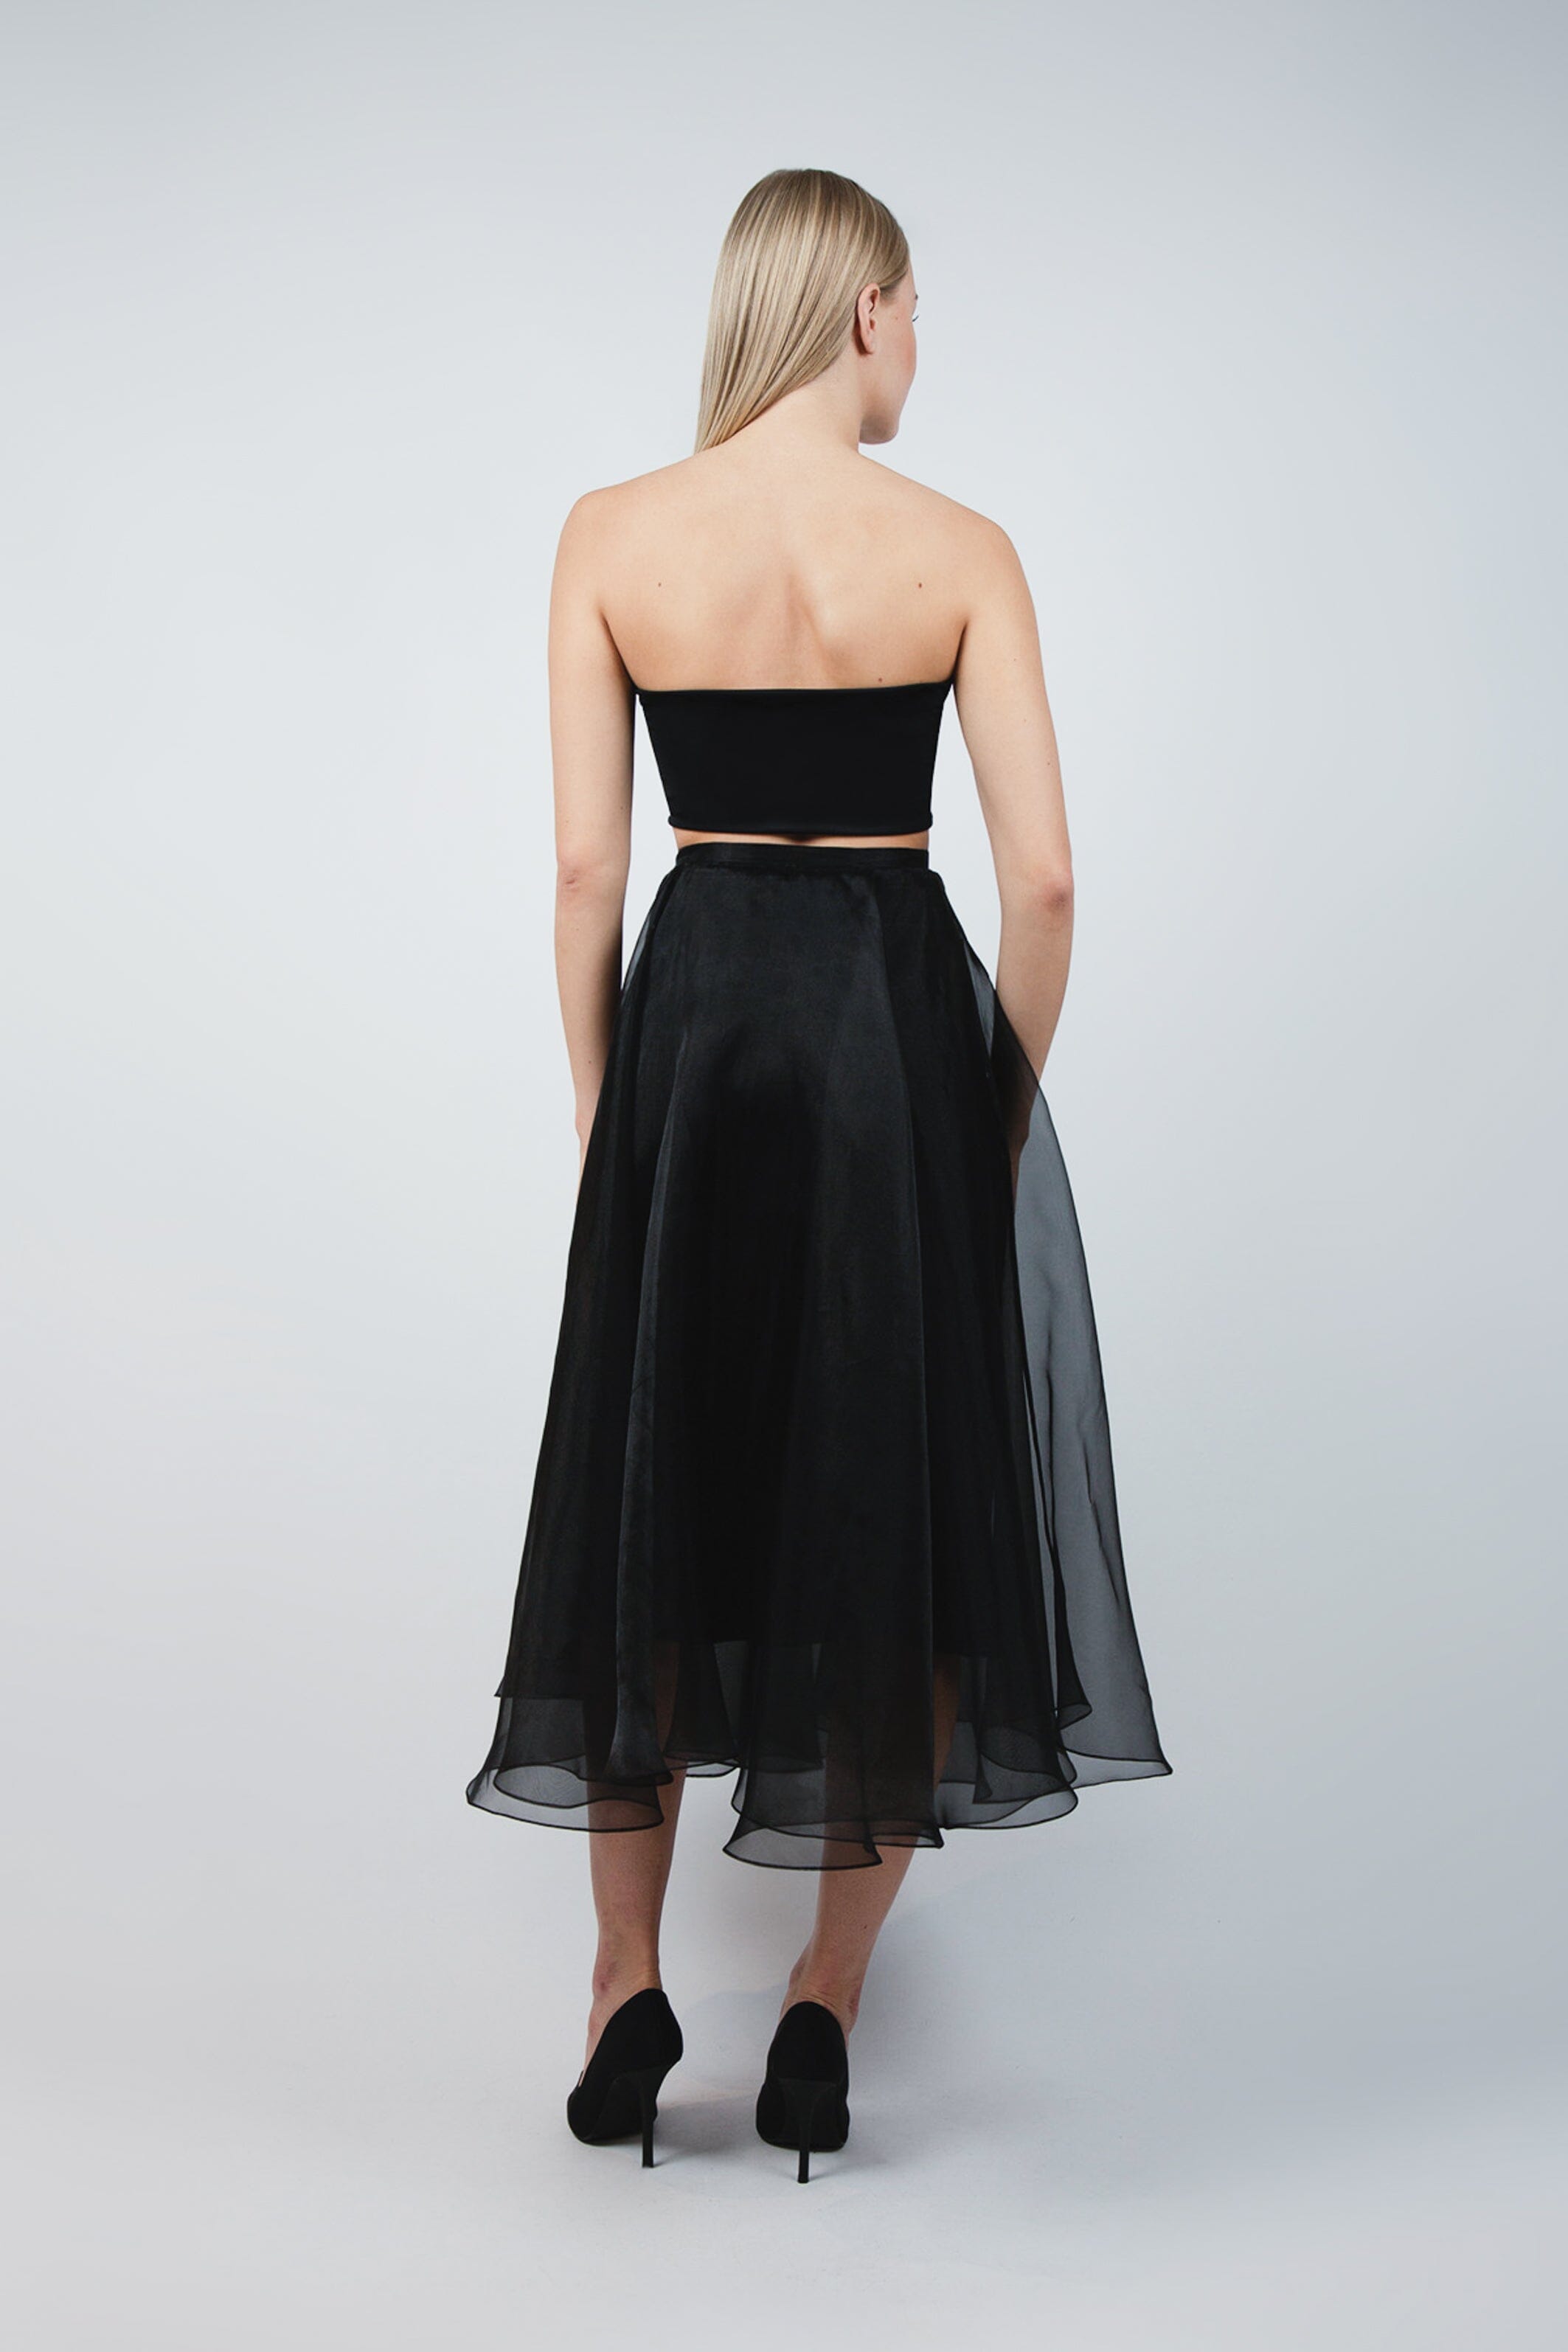  Dare To Feel two-piece skirt Black Product Amoralle